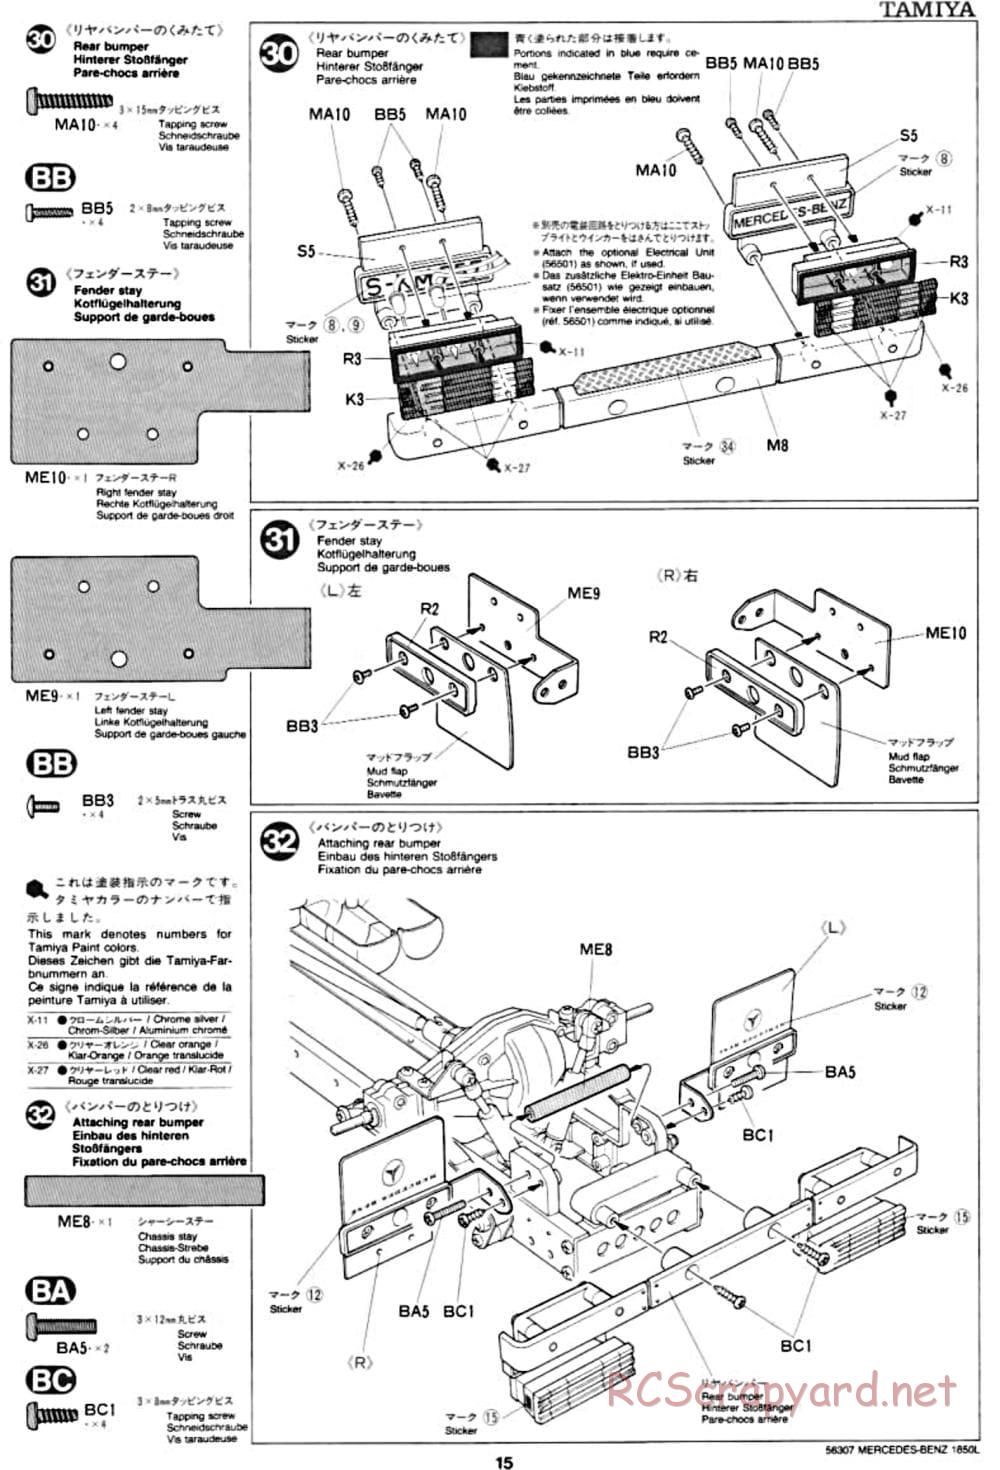 Tamiya - Mercedes-Benz 1850L Delivery Truck - Manual - Page 15